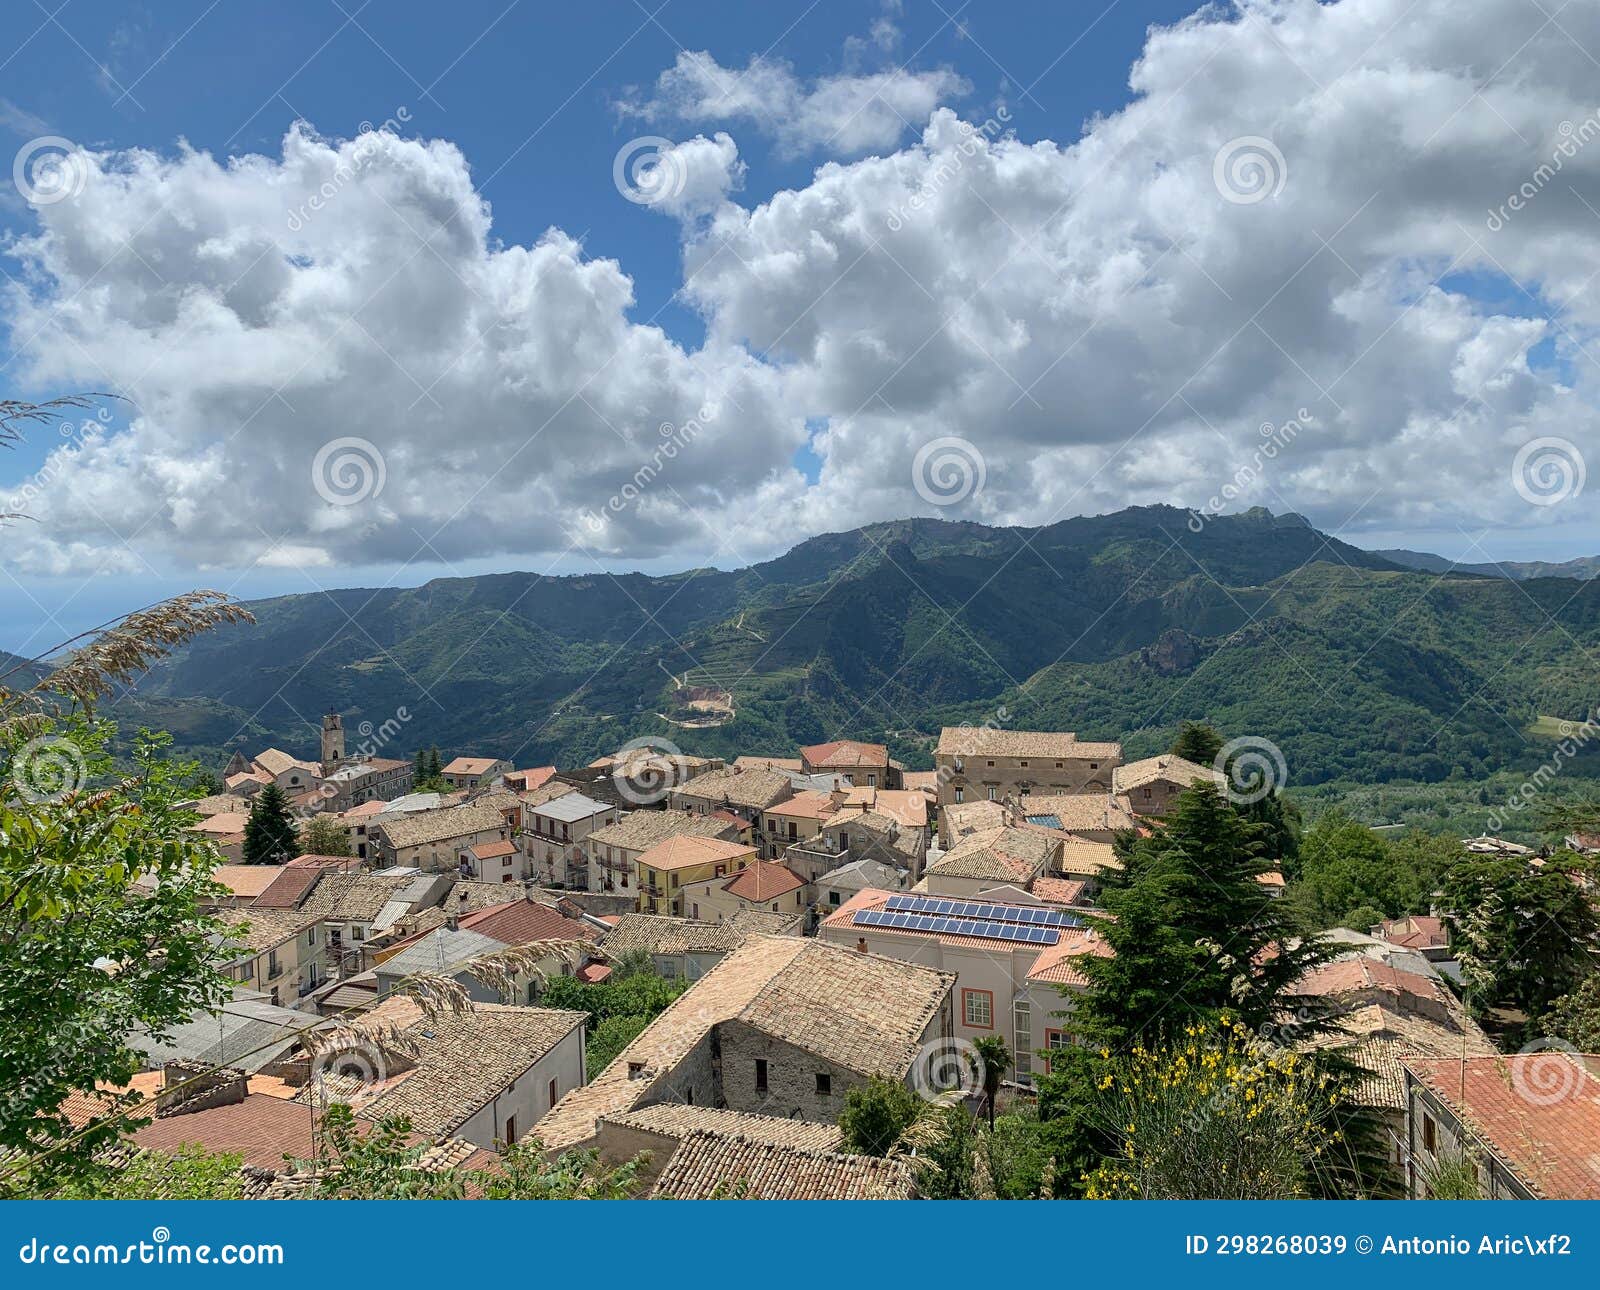 panoramic view of the village of aiello calabro